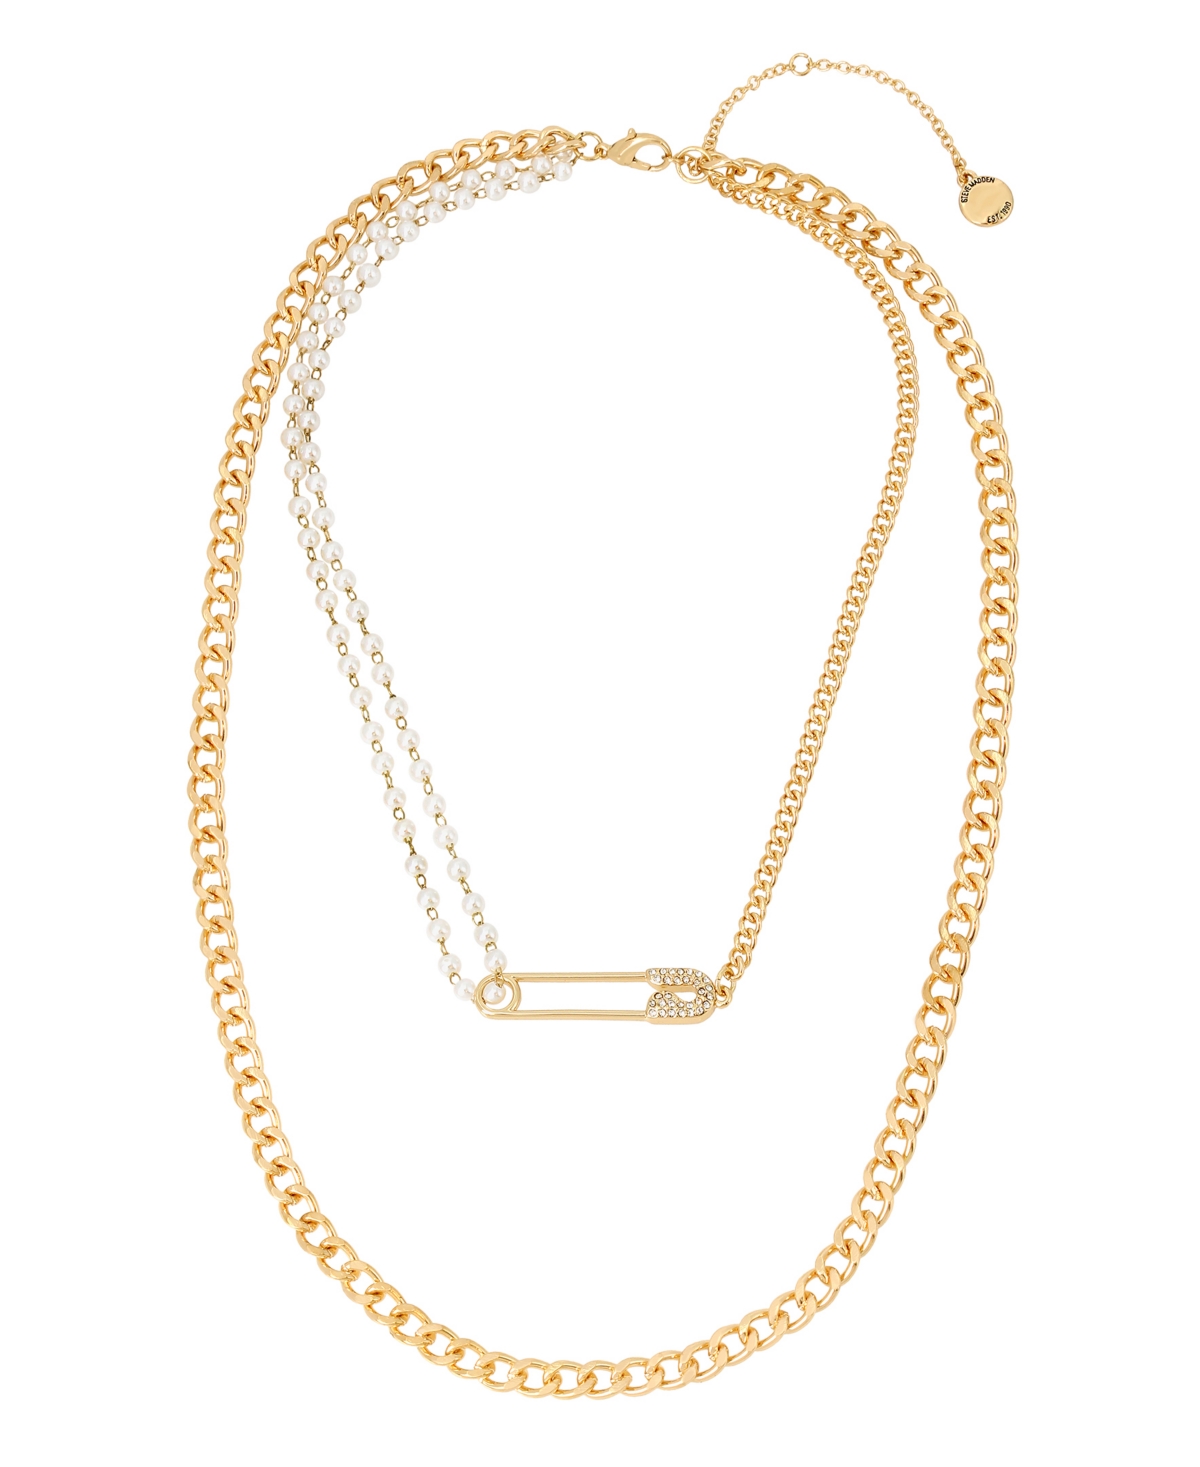 STEVE MADDEN SAFETY PIN LAYERED NECKLACE